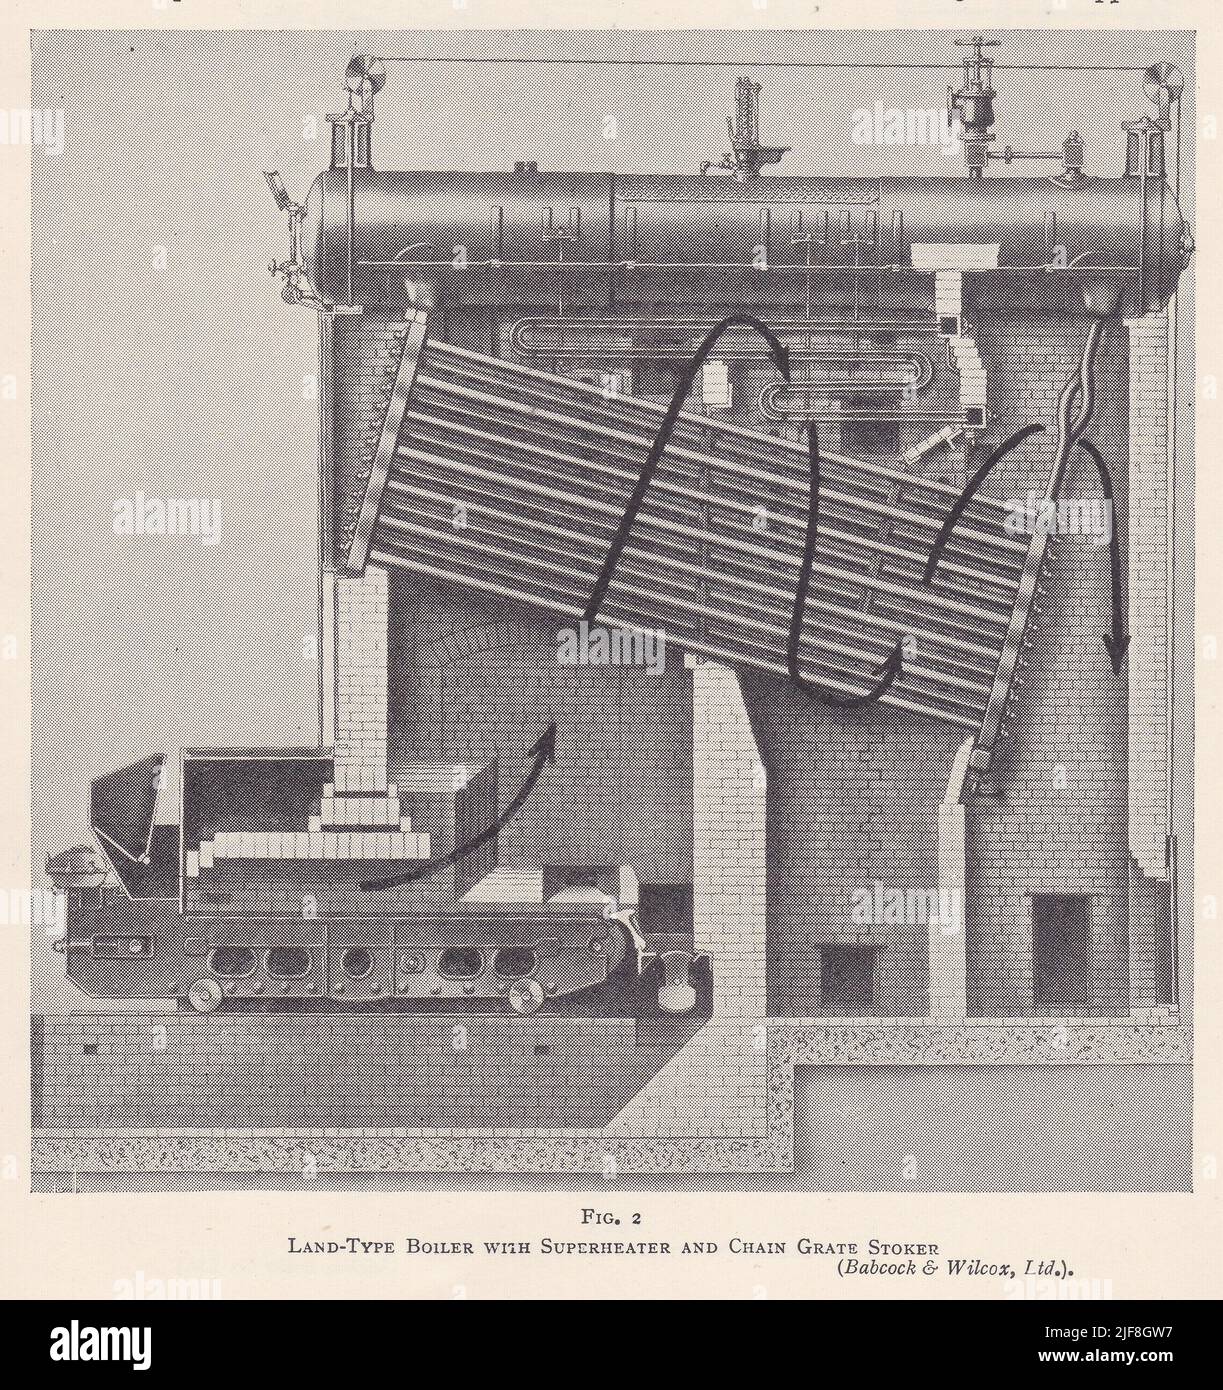 Vintage illustration of a land type boiler with superheater and chain grate stoker - Babcock & Wilcox. Ltd. Stock Photo